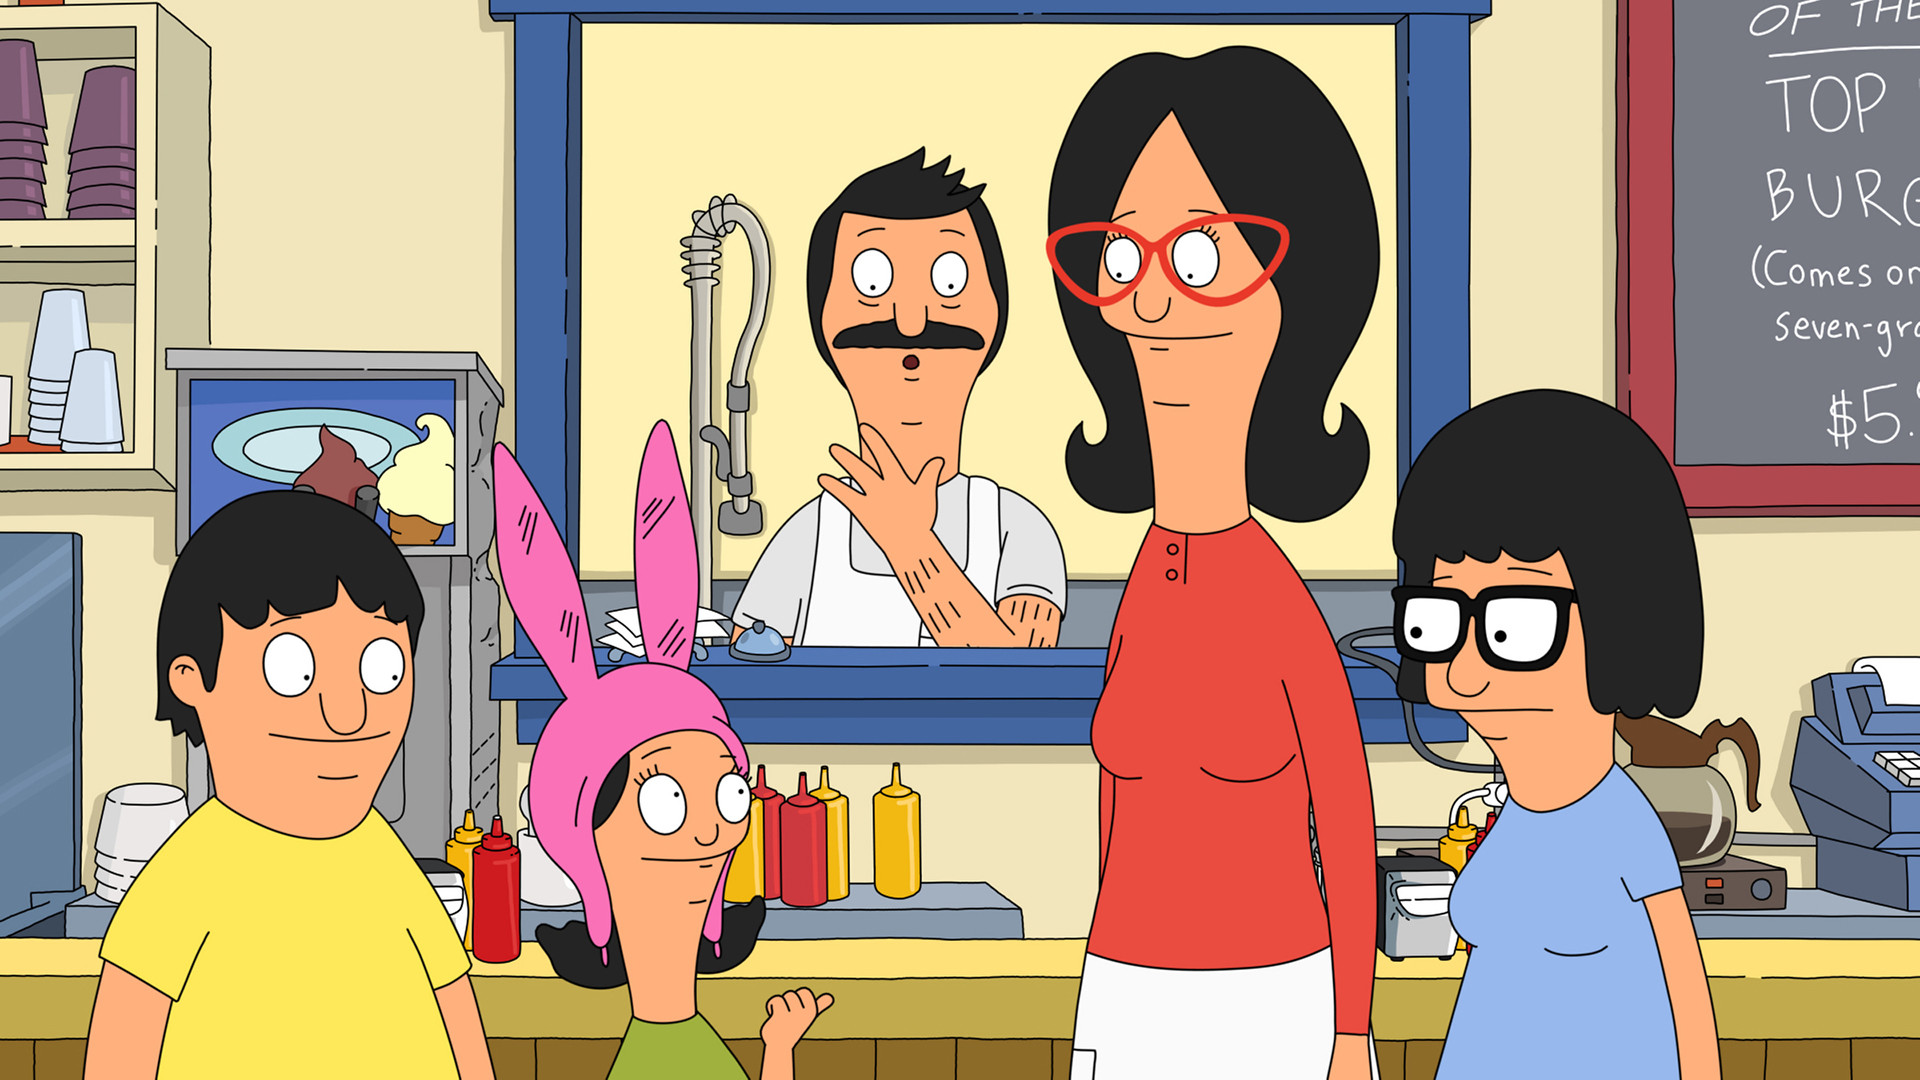 1920x1080 Bobs Burgers 2017 return premiere release date & schedule & air dates of  your favorite tv shows.